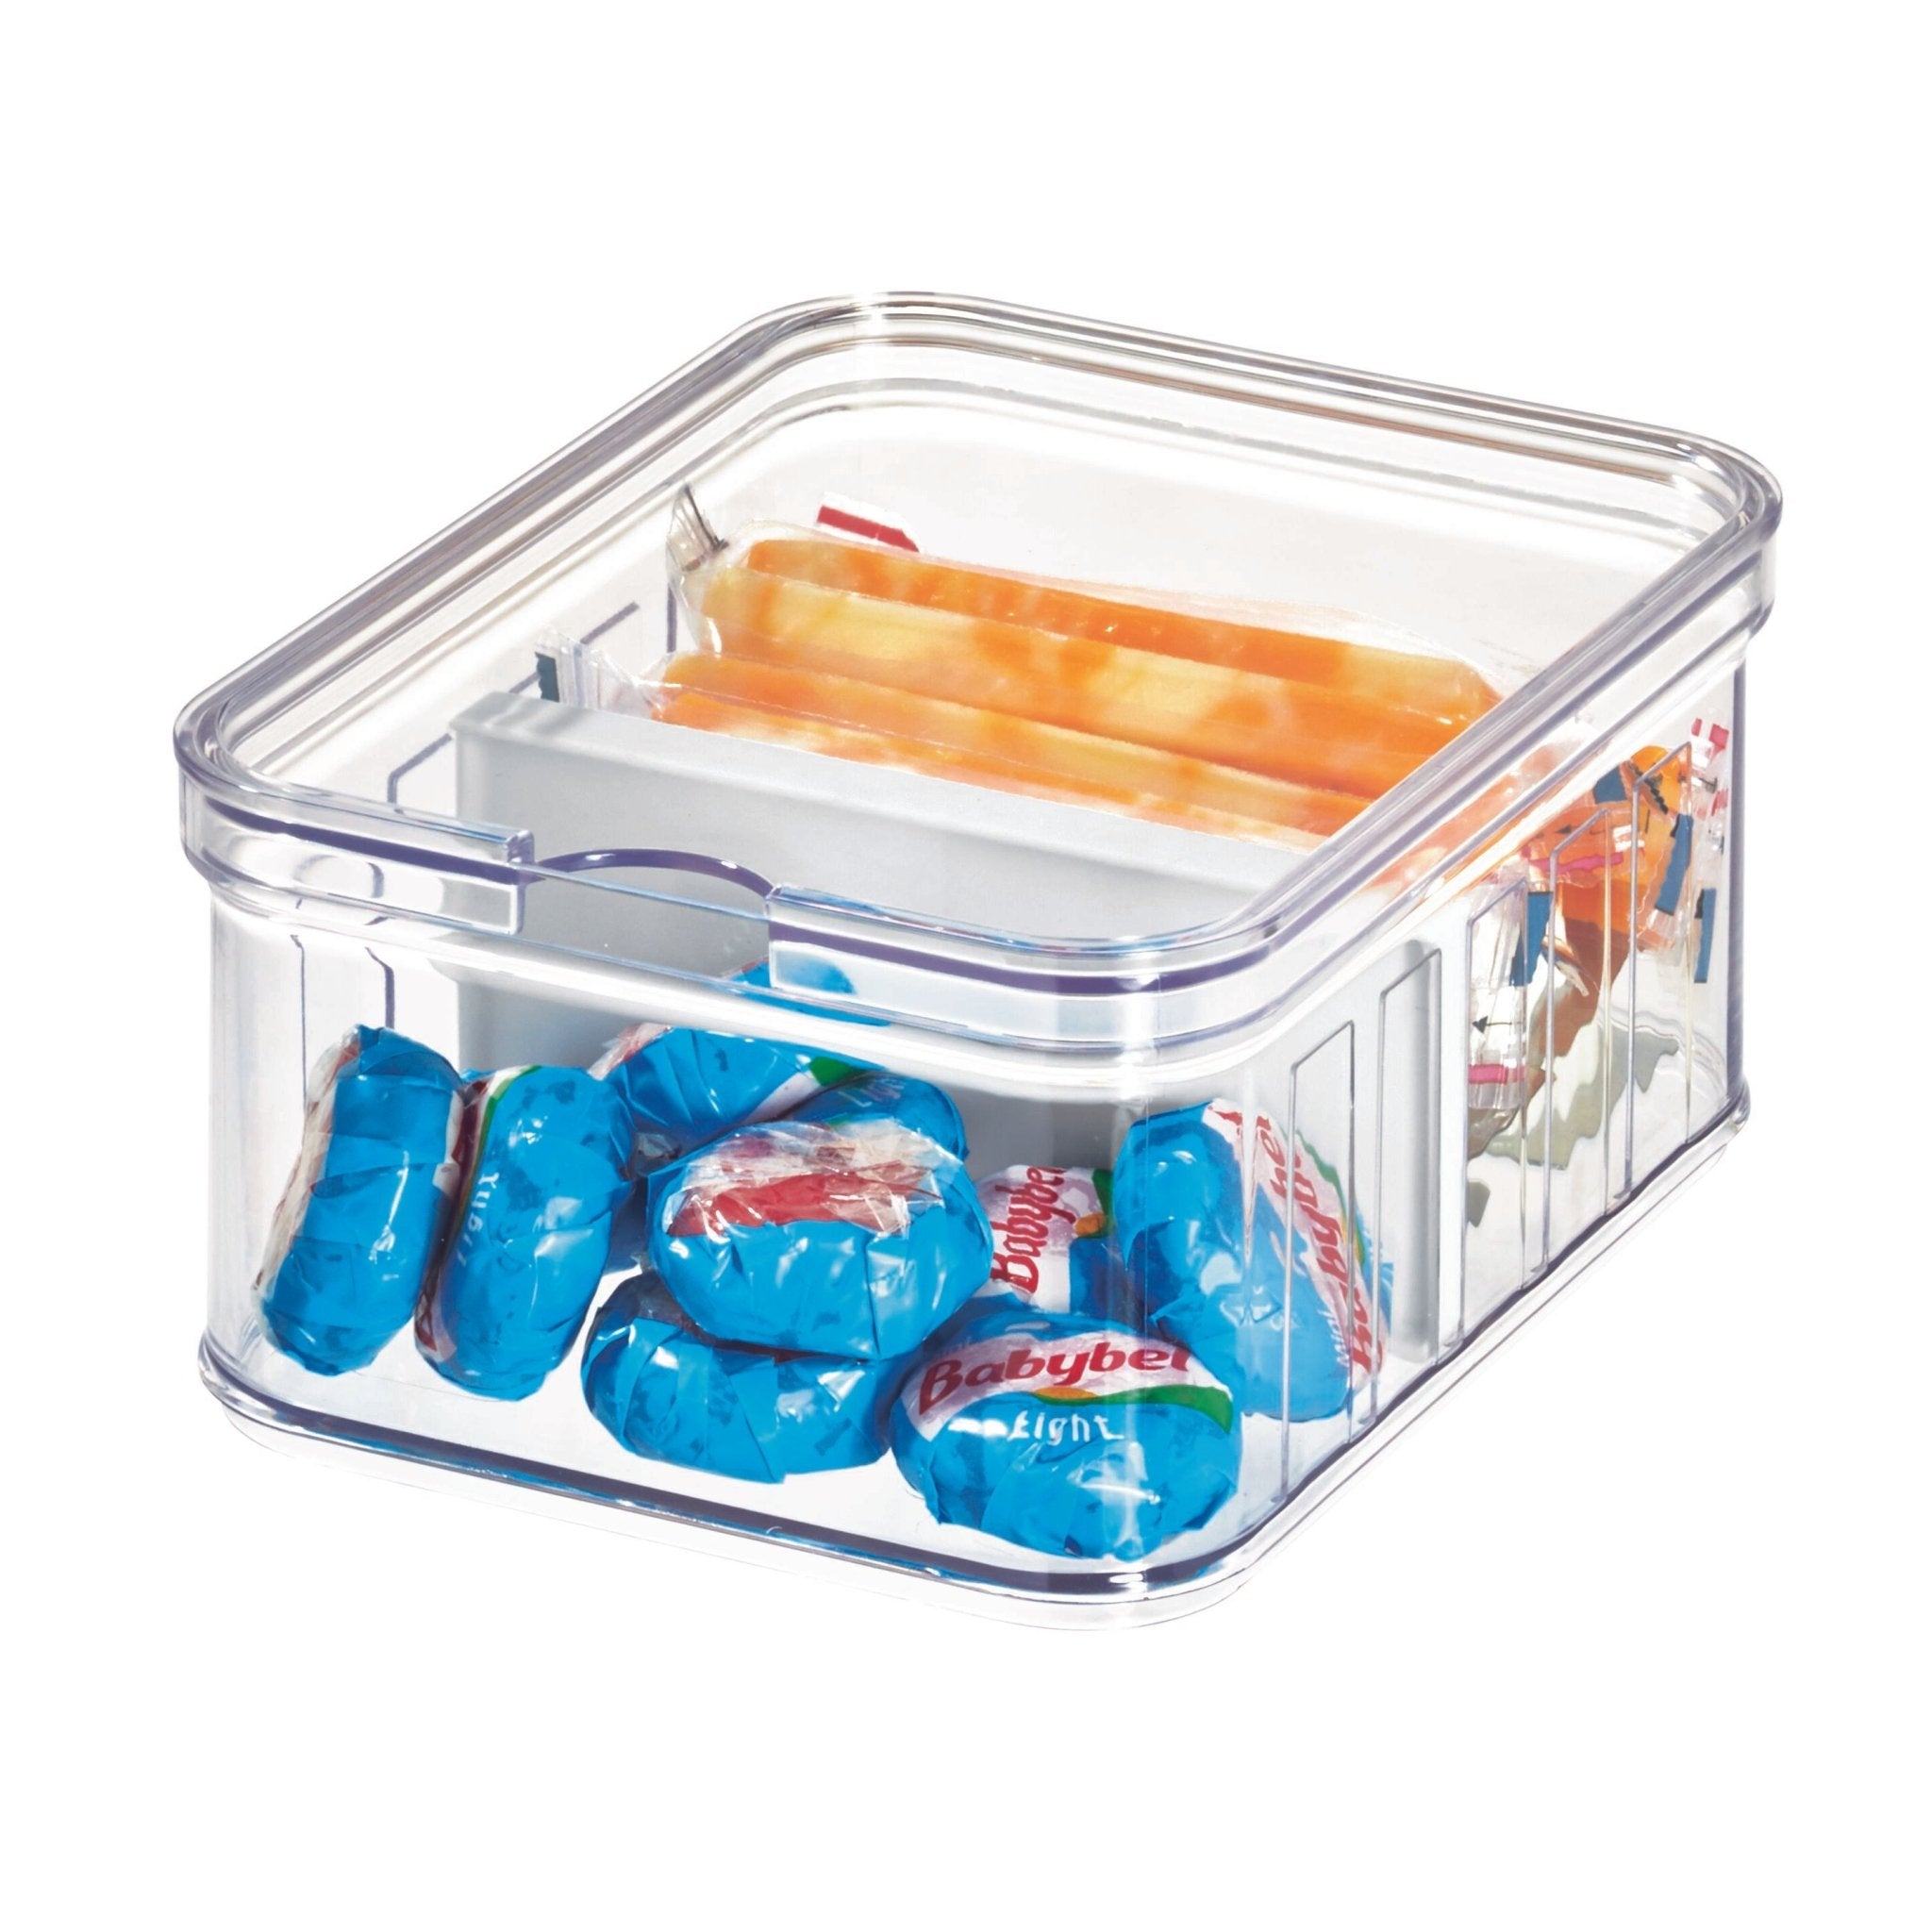 Idesign crisp storage container with partition clearly small